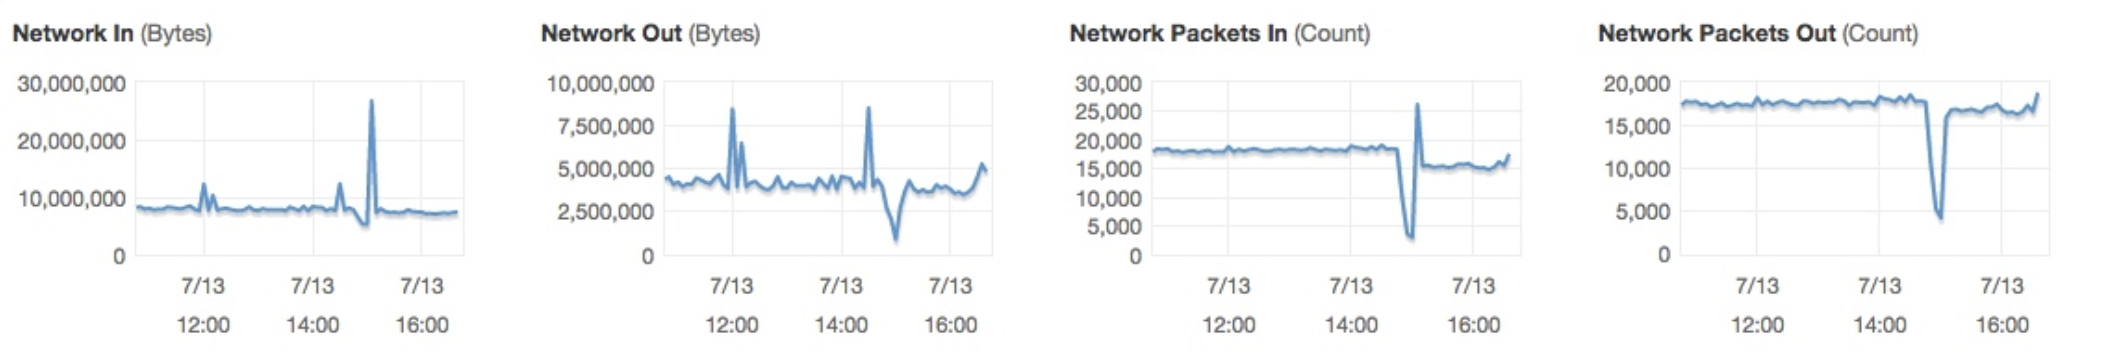 Menace ELB Outage EC2 Network Monitoring